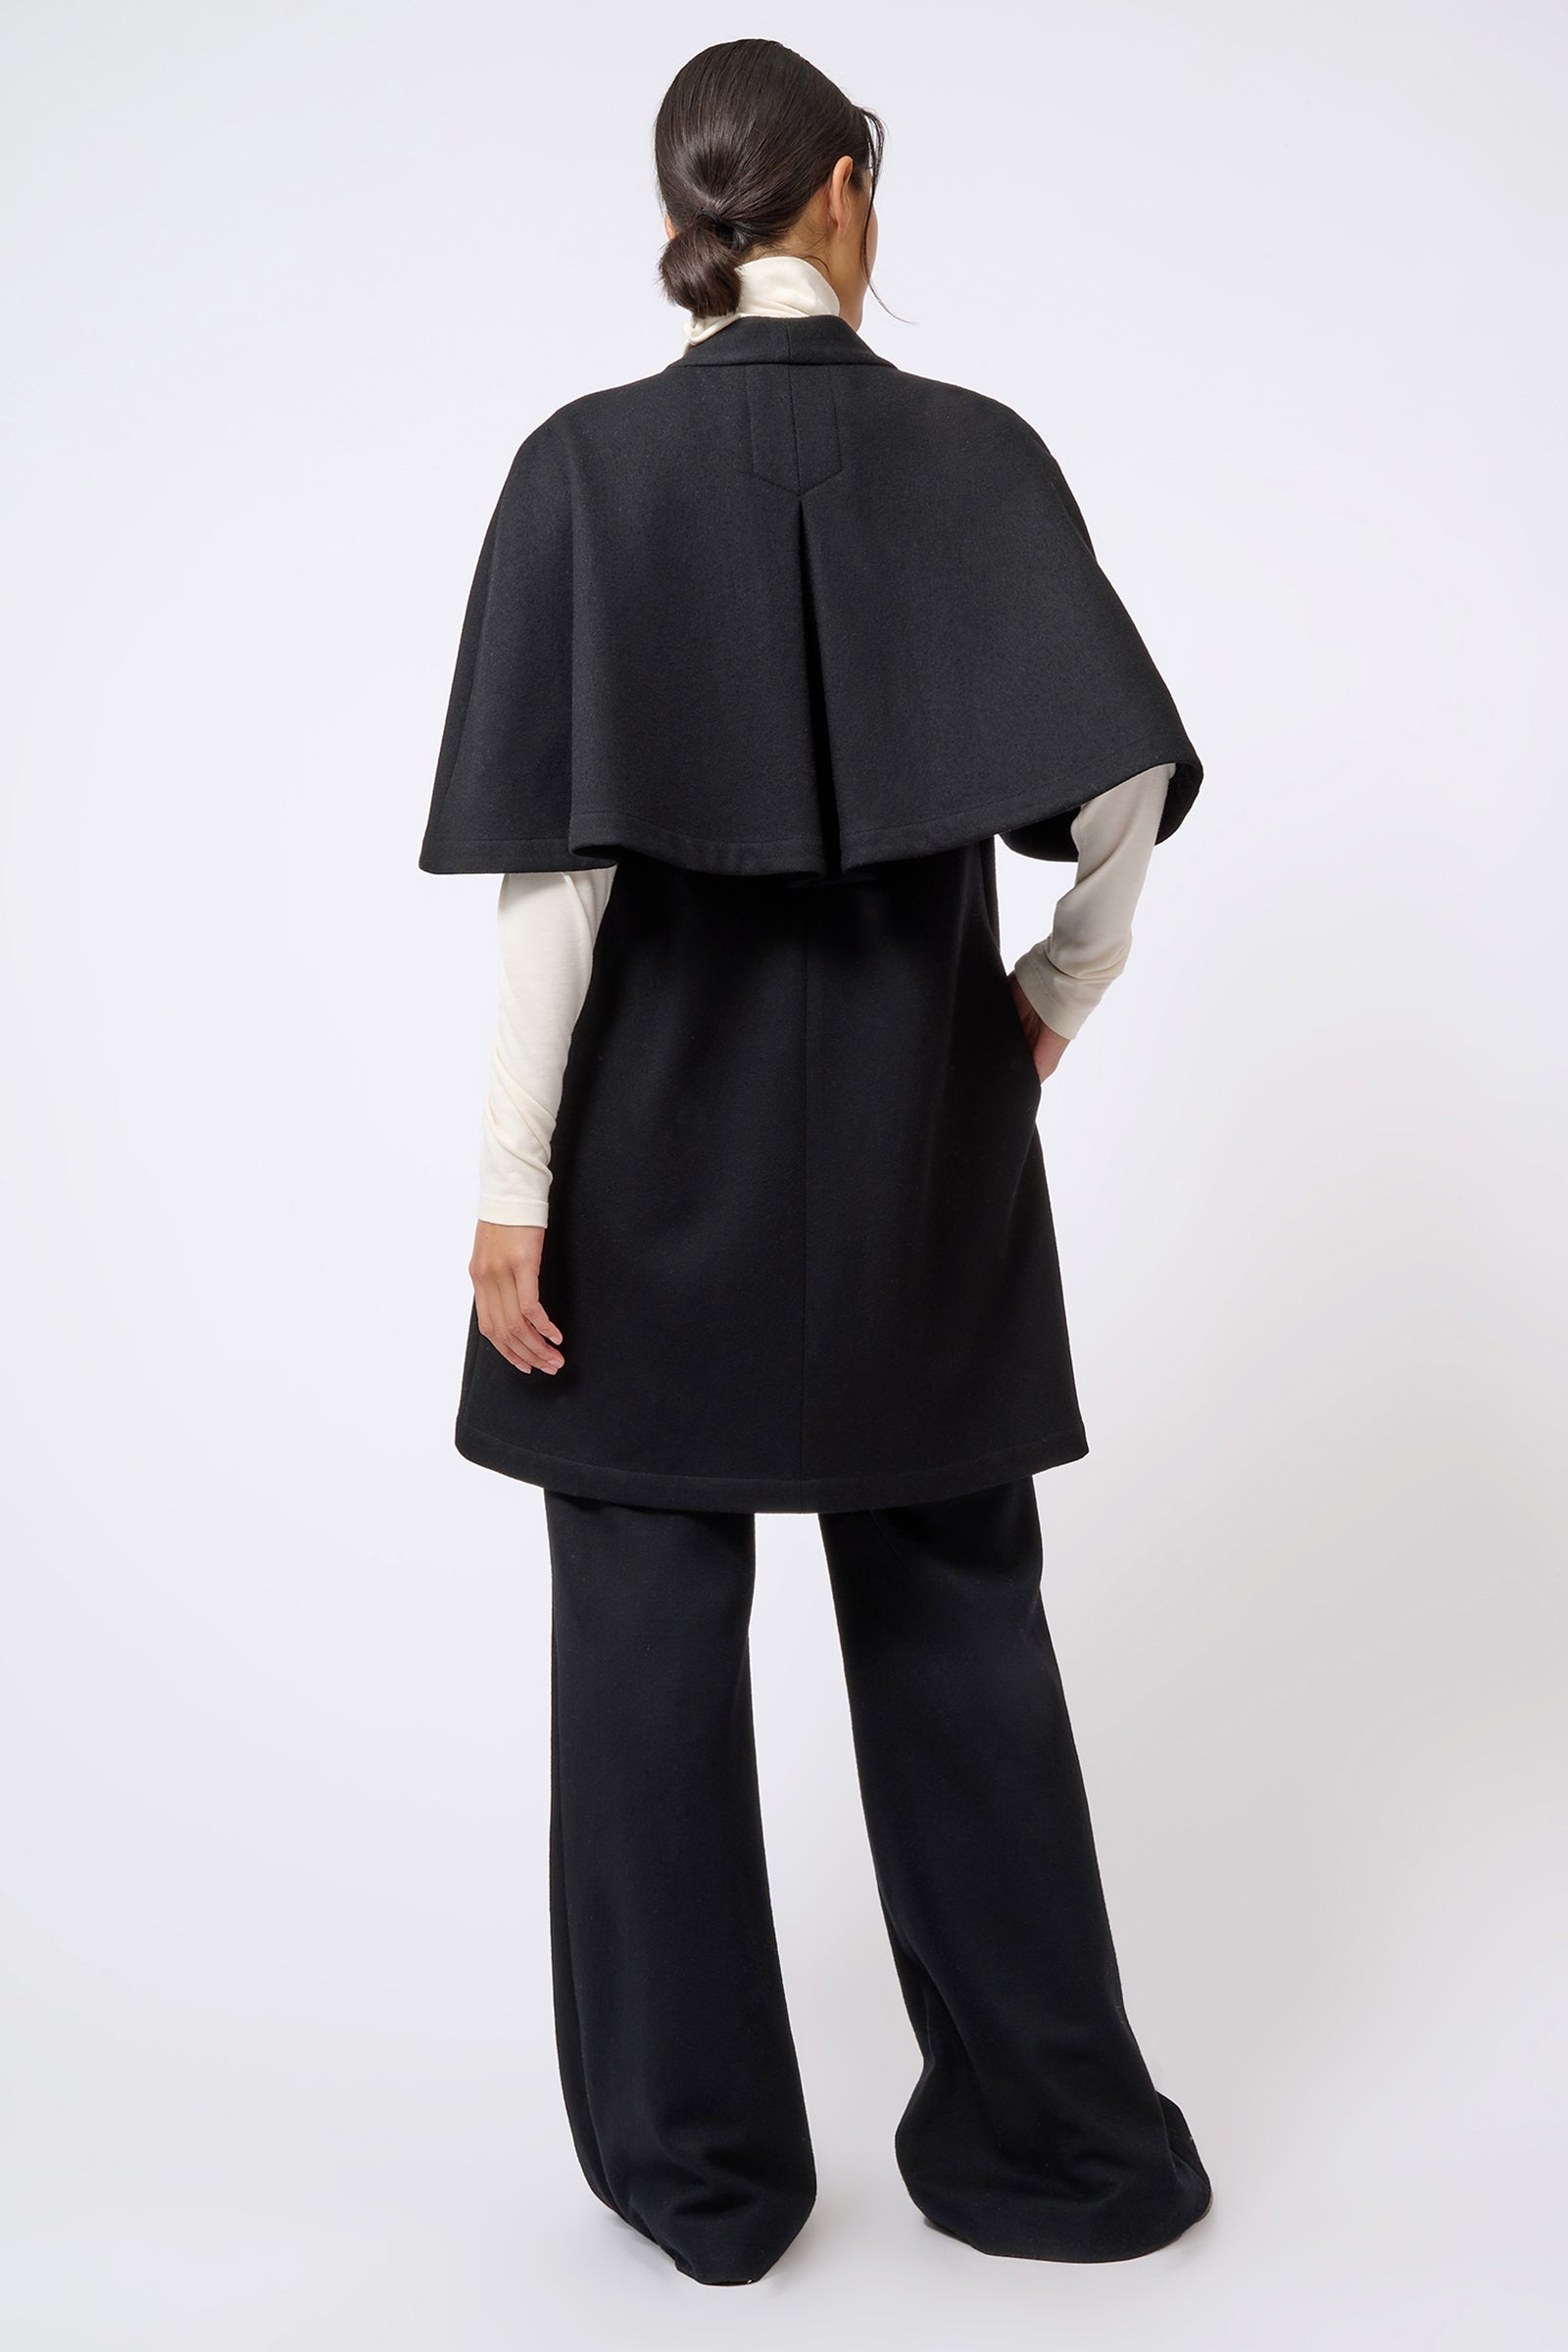 Kal Rieman Cape Back Cardigan in Black on Model with Hands in Pockets Full Front View